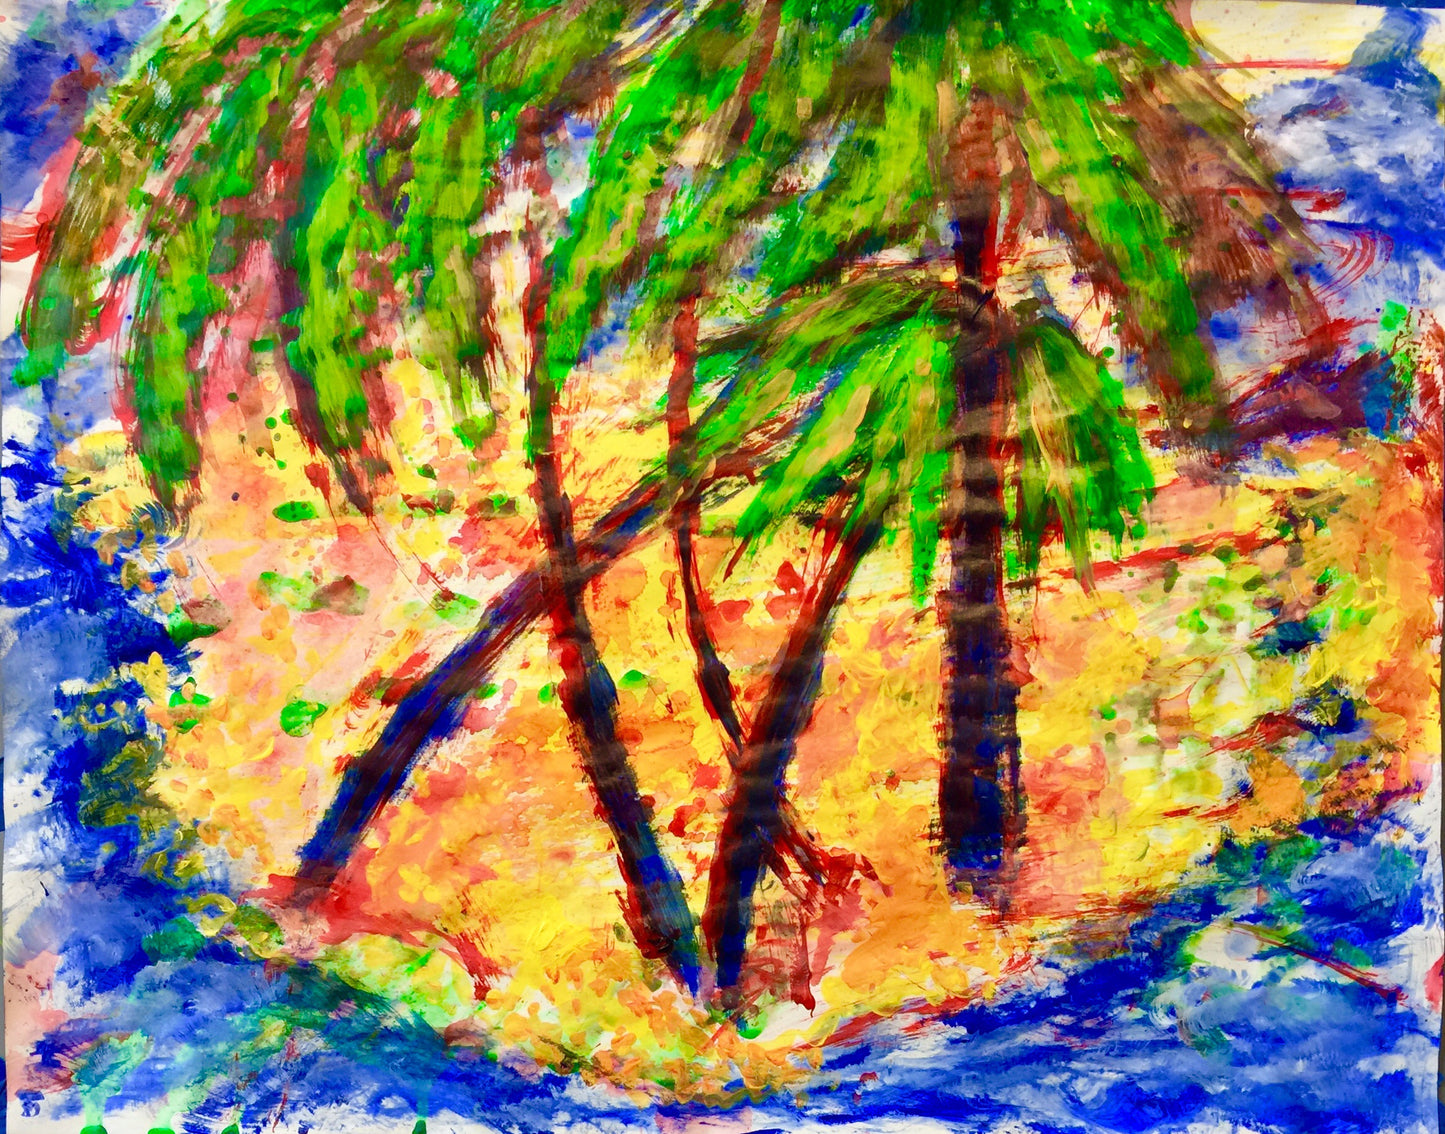 Abadan  II - Sonarta.com.My Hometown  ❤️❤️❤️❤️  Palm trees, beaches and sand, that's what life is about.  Abadan is an Acrylic on Paper painting by Shahla Rahimi Reynolds.  it is 24” H.X 19" W.  Abadan's copies are printed on premium canvas and are ready to be hung.